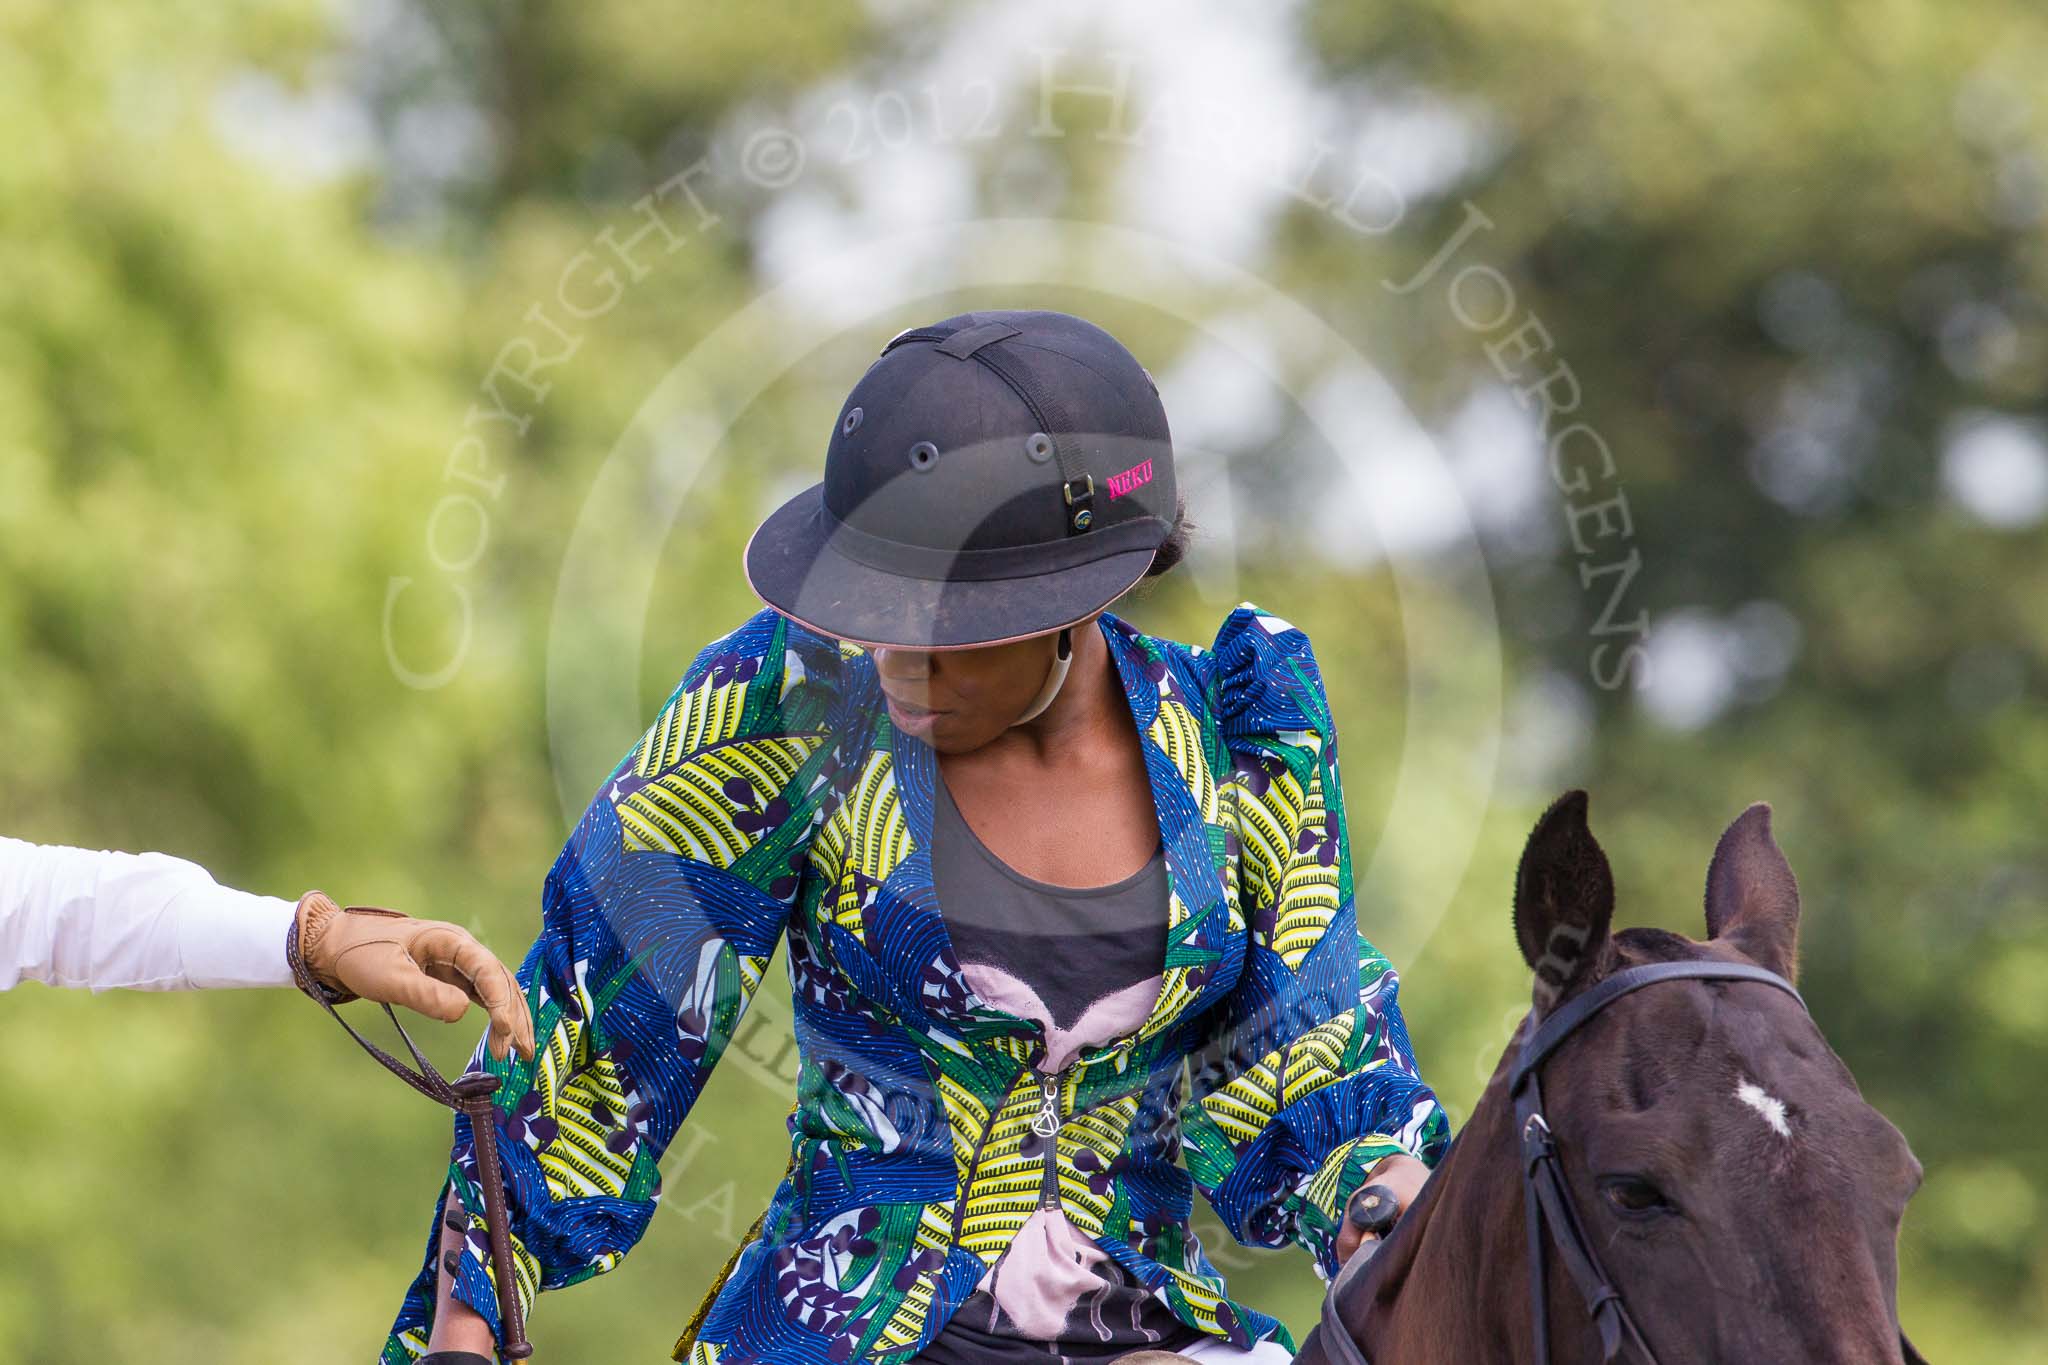 7th Heritage Polo Cup semi-finals: Uneku Atawodi Team Captain of the AMG PETROENERGY Polo Team wearing Fashion of Nigerian Fashion Designer DNZY..
Hurtwood Park Polo Club,
Ewhurst Green,
Surrey,
United Kingdom,
on 04 August 2012 at 13:45, image #168